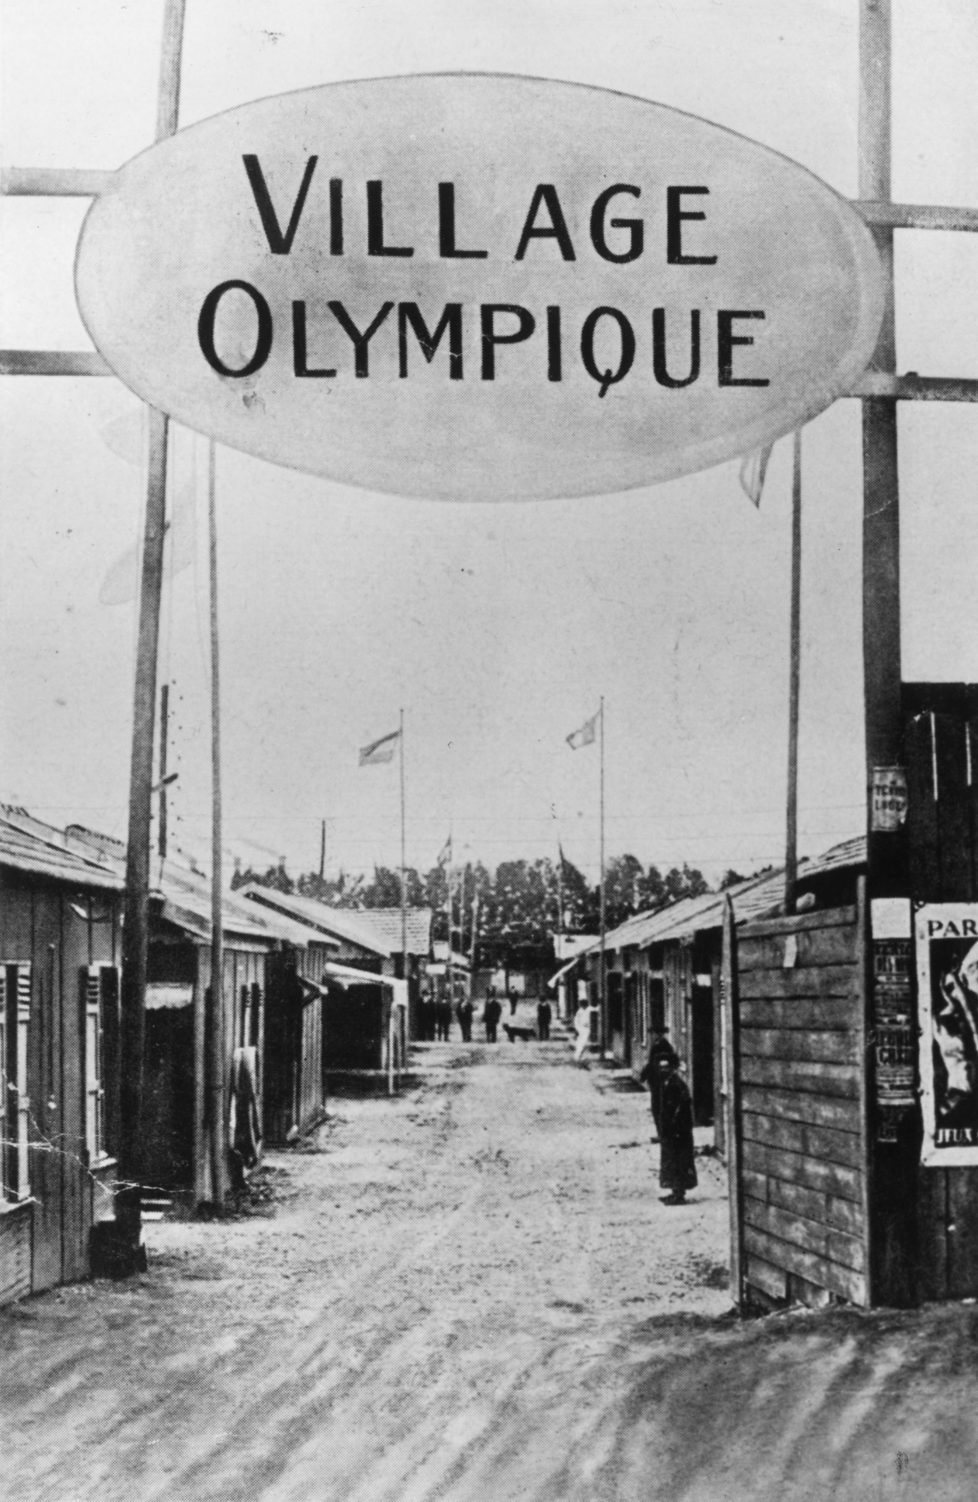 1924: The first ever Olympic Village, built for the 1924 games in Paris. (Photo by Hulton Archive/Getty Images)